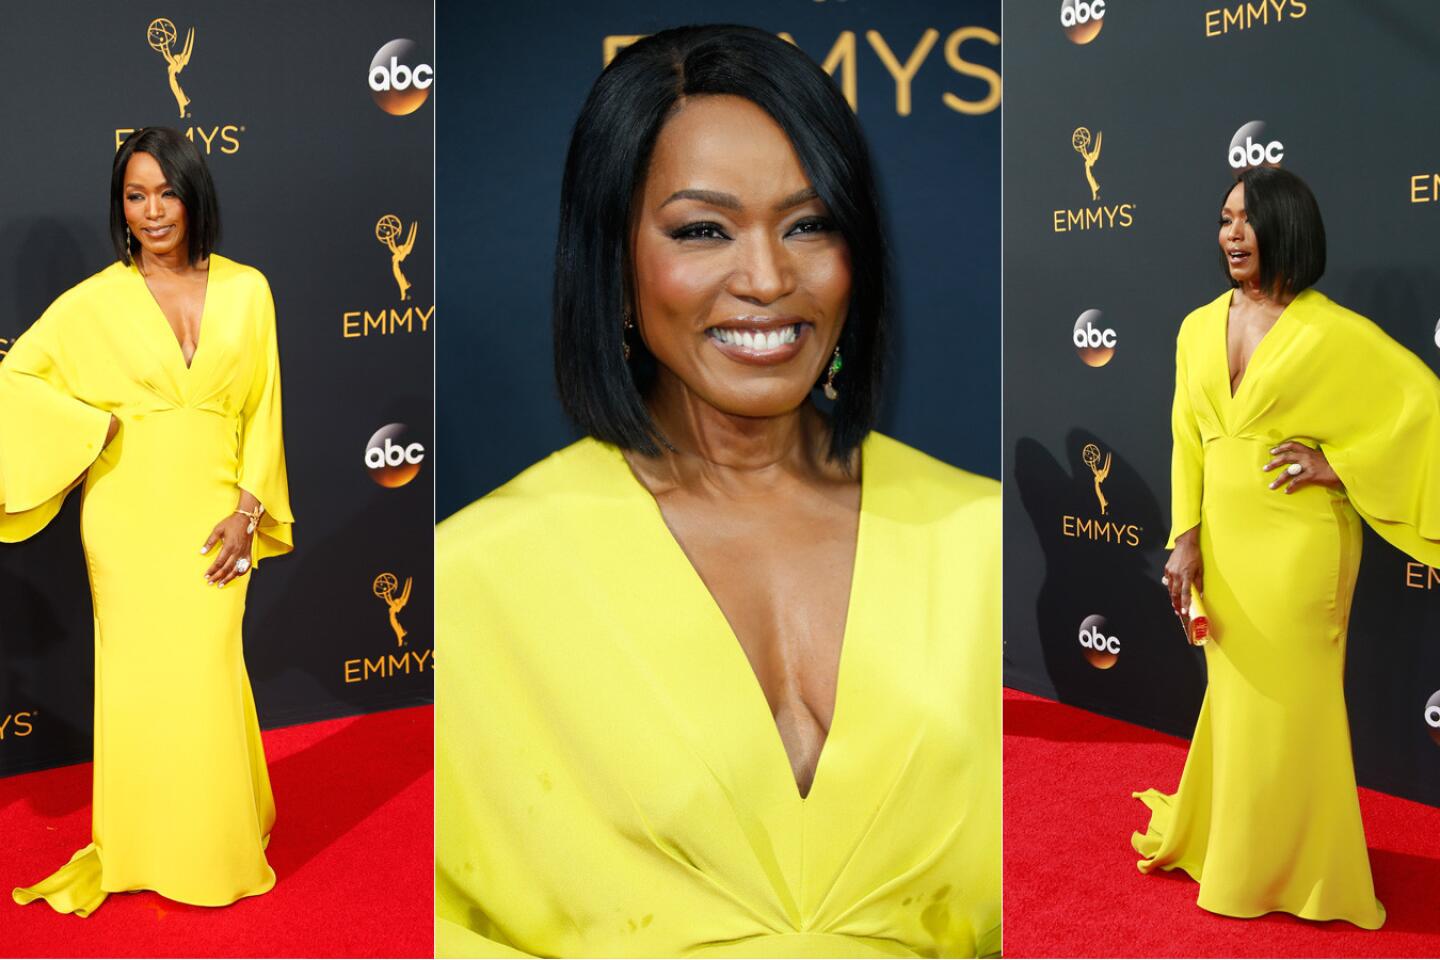 Angela Bassett in Christian Siriano makes our best-dressed list.